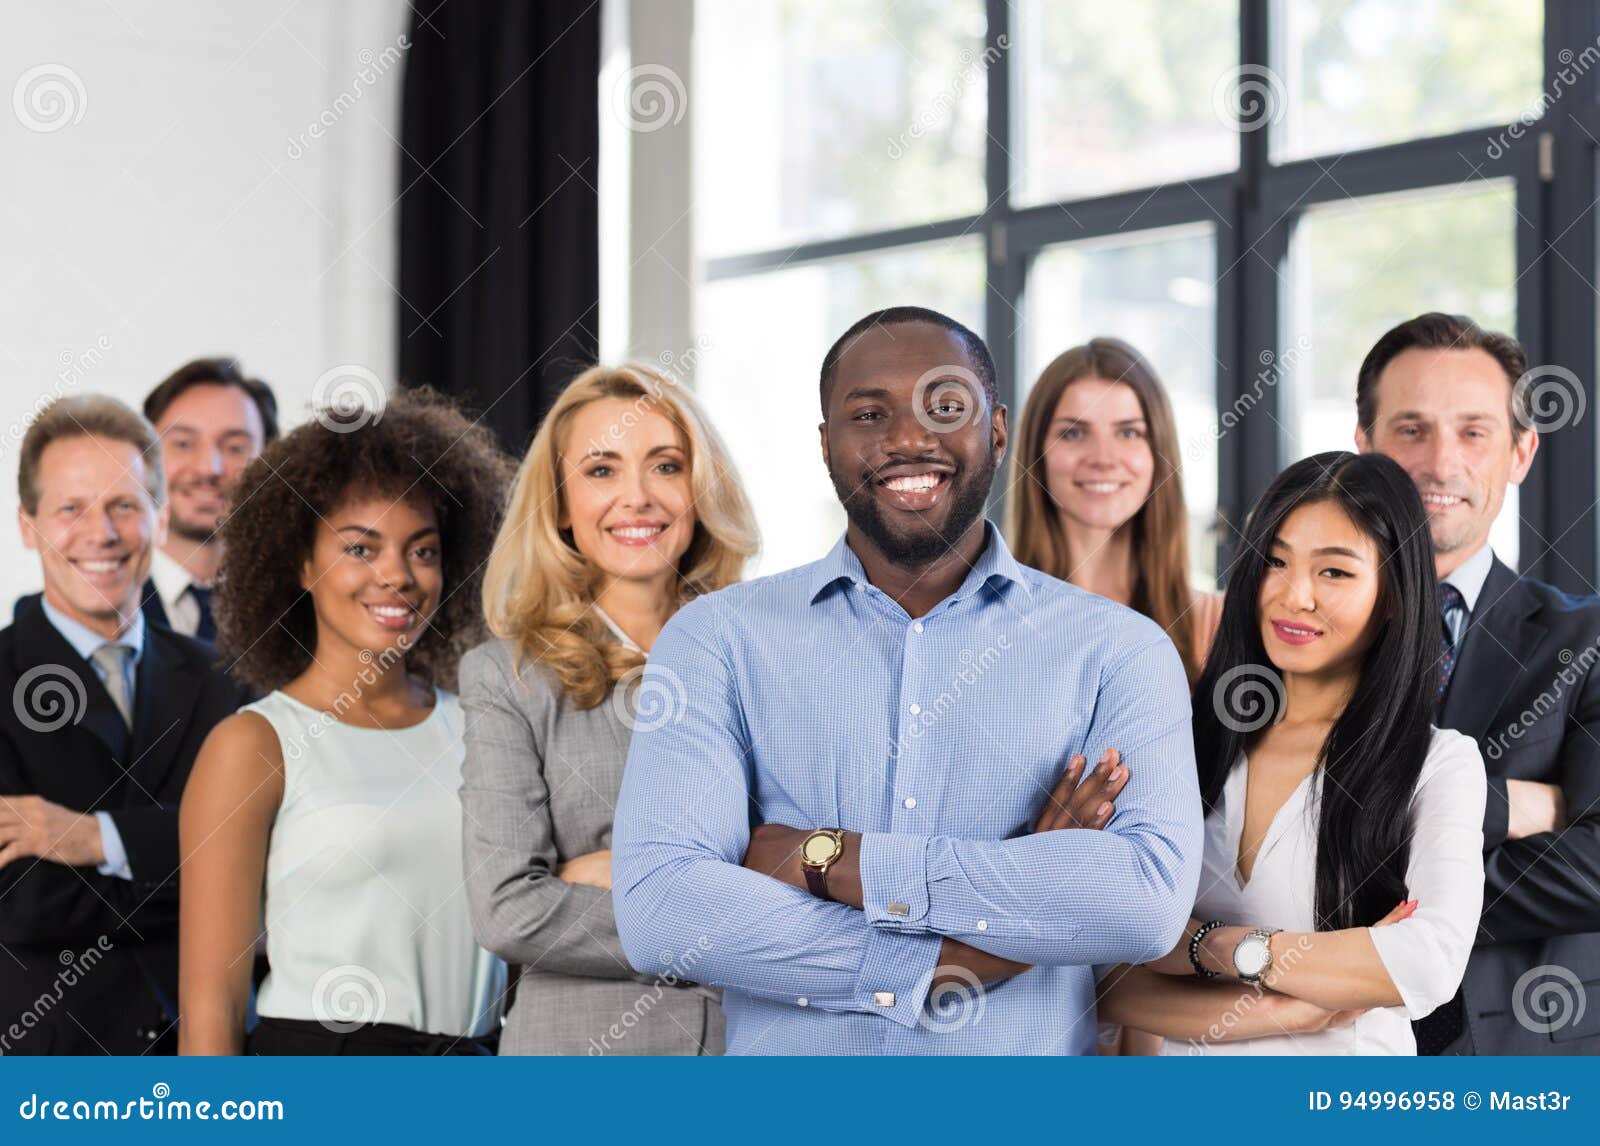 african american businessman boss with group of business people in creative office, successful mix race man leading